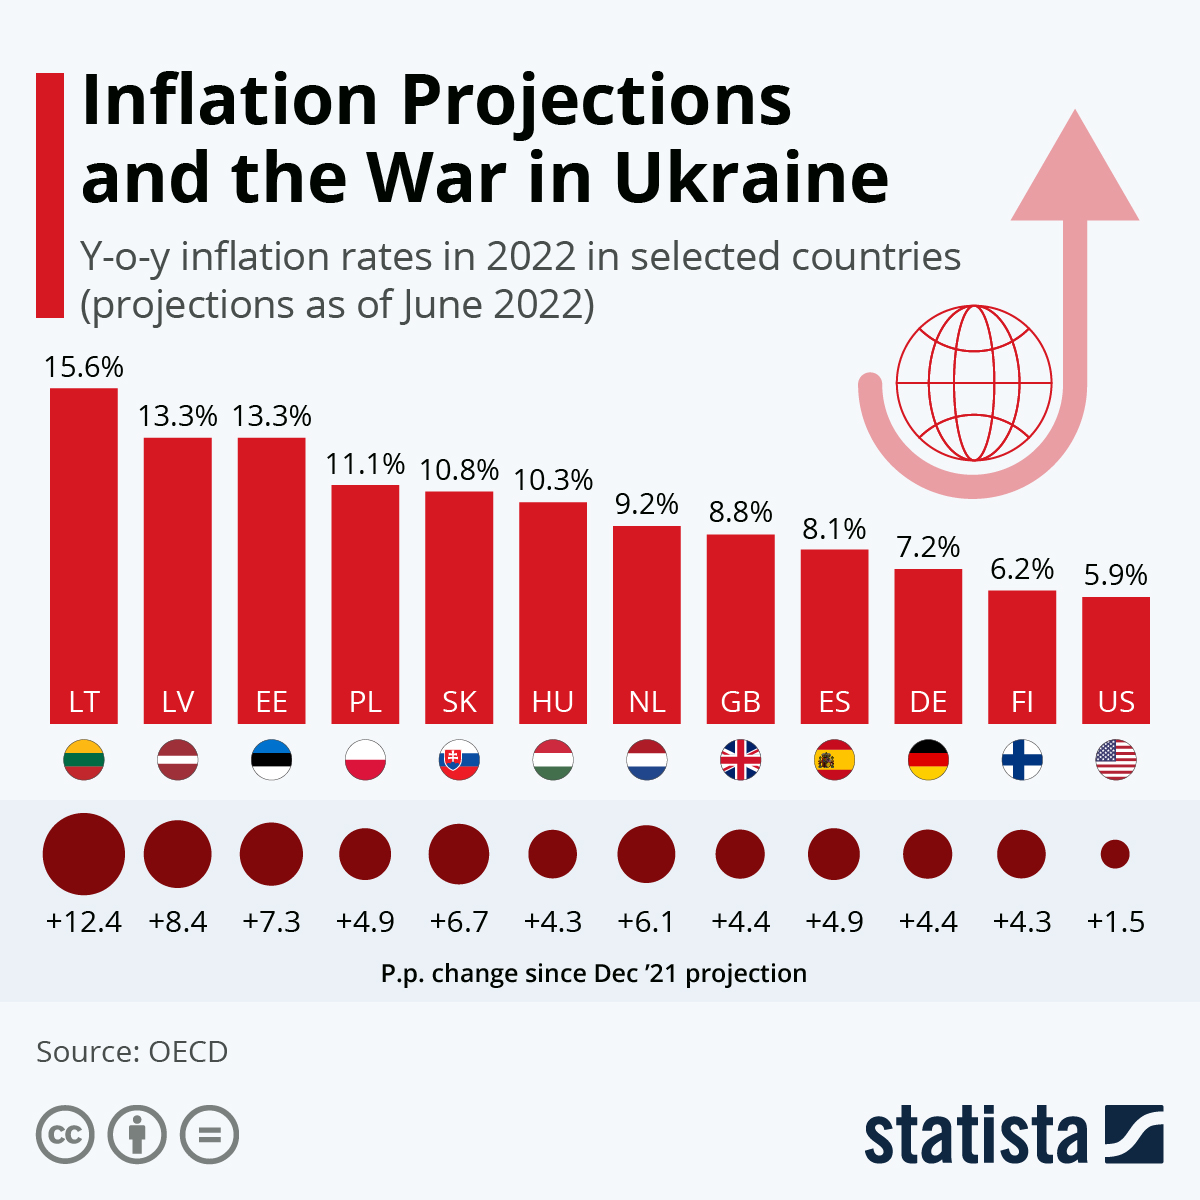 Inflation Projections and the War in Ukraine